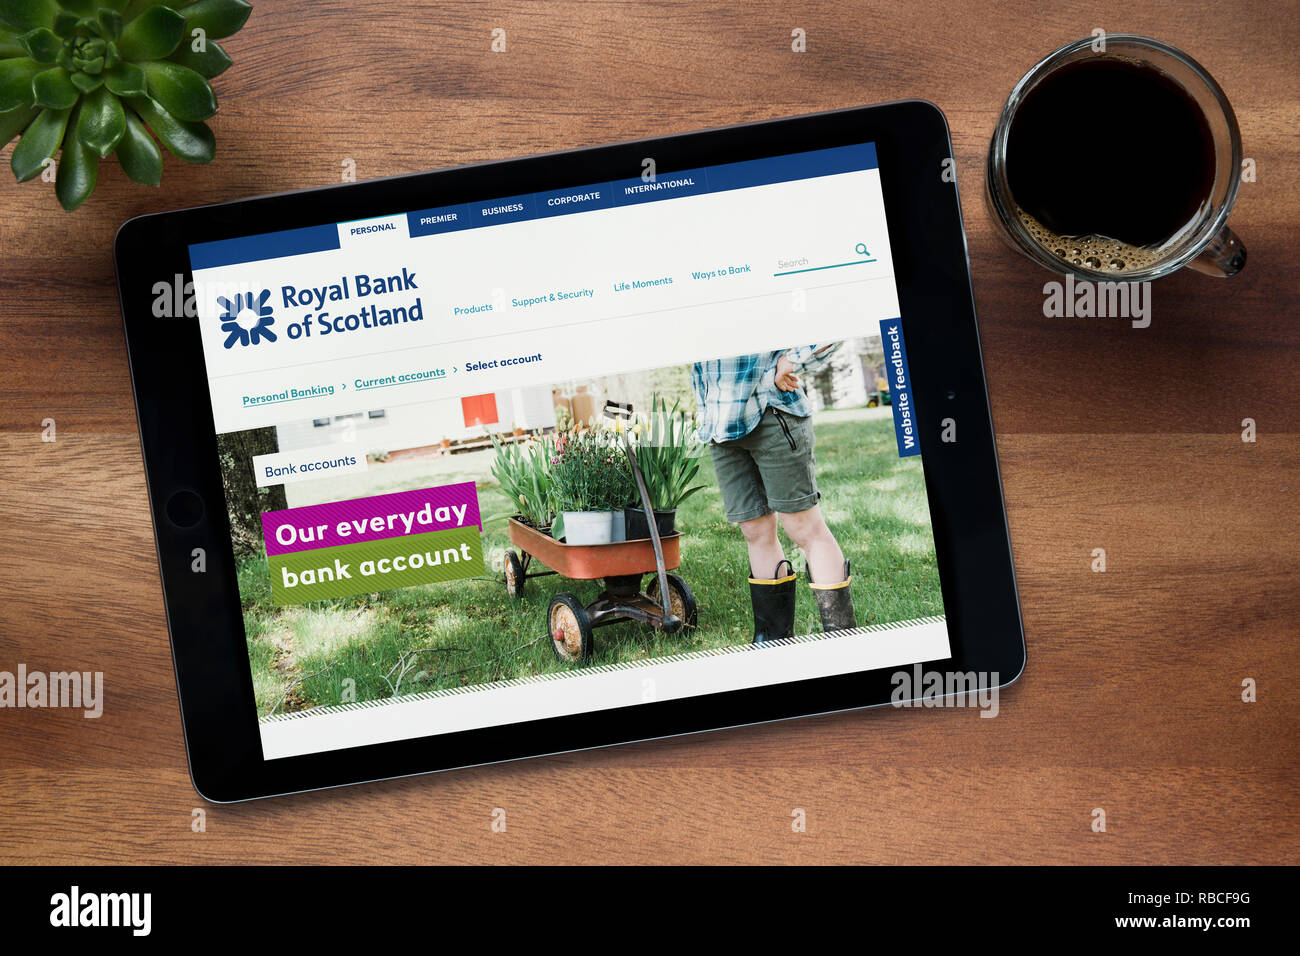 The website of Royal Bank of Scotland is seen on an iPad tablet, on a wooden table along with an espresso coffee and a house plant (Editorial only). Stock Photo